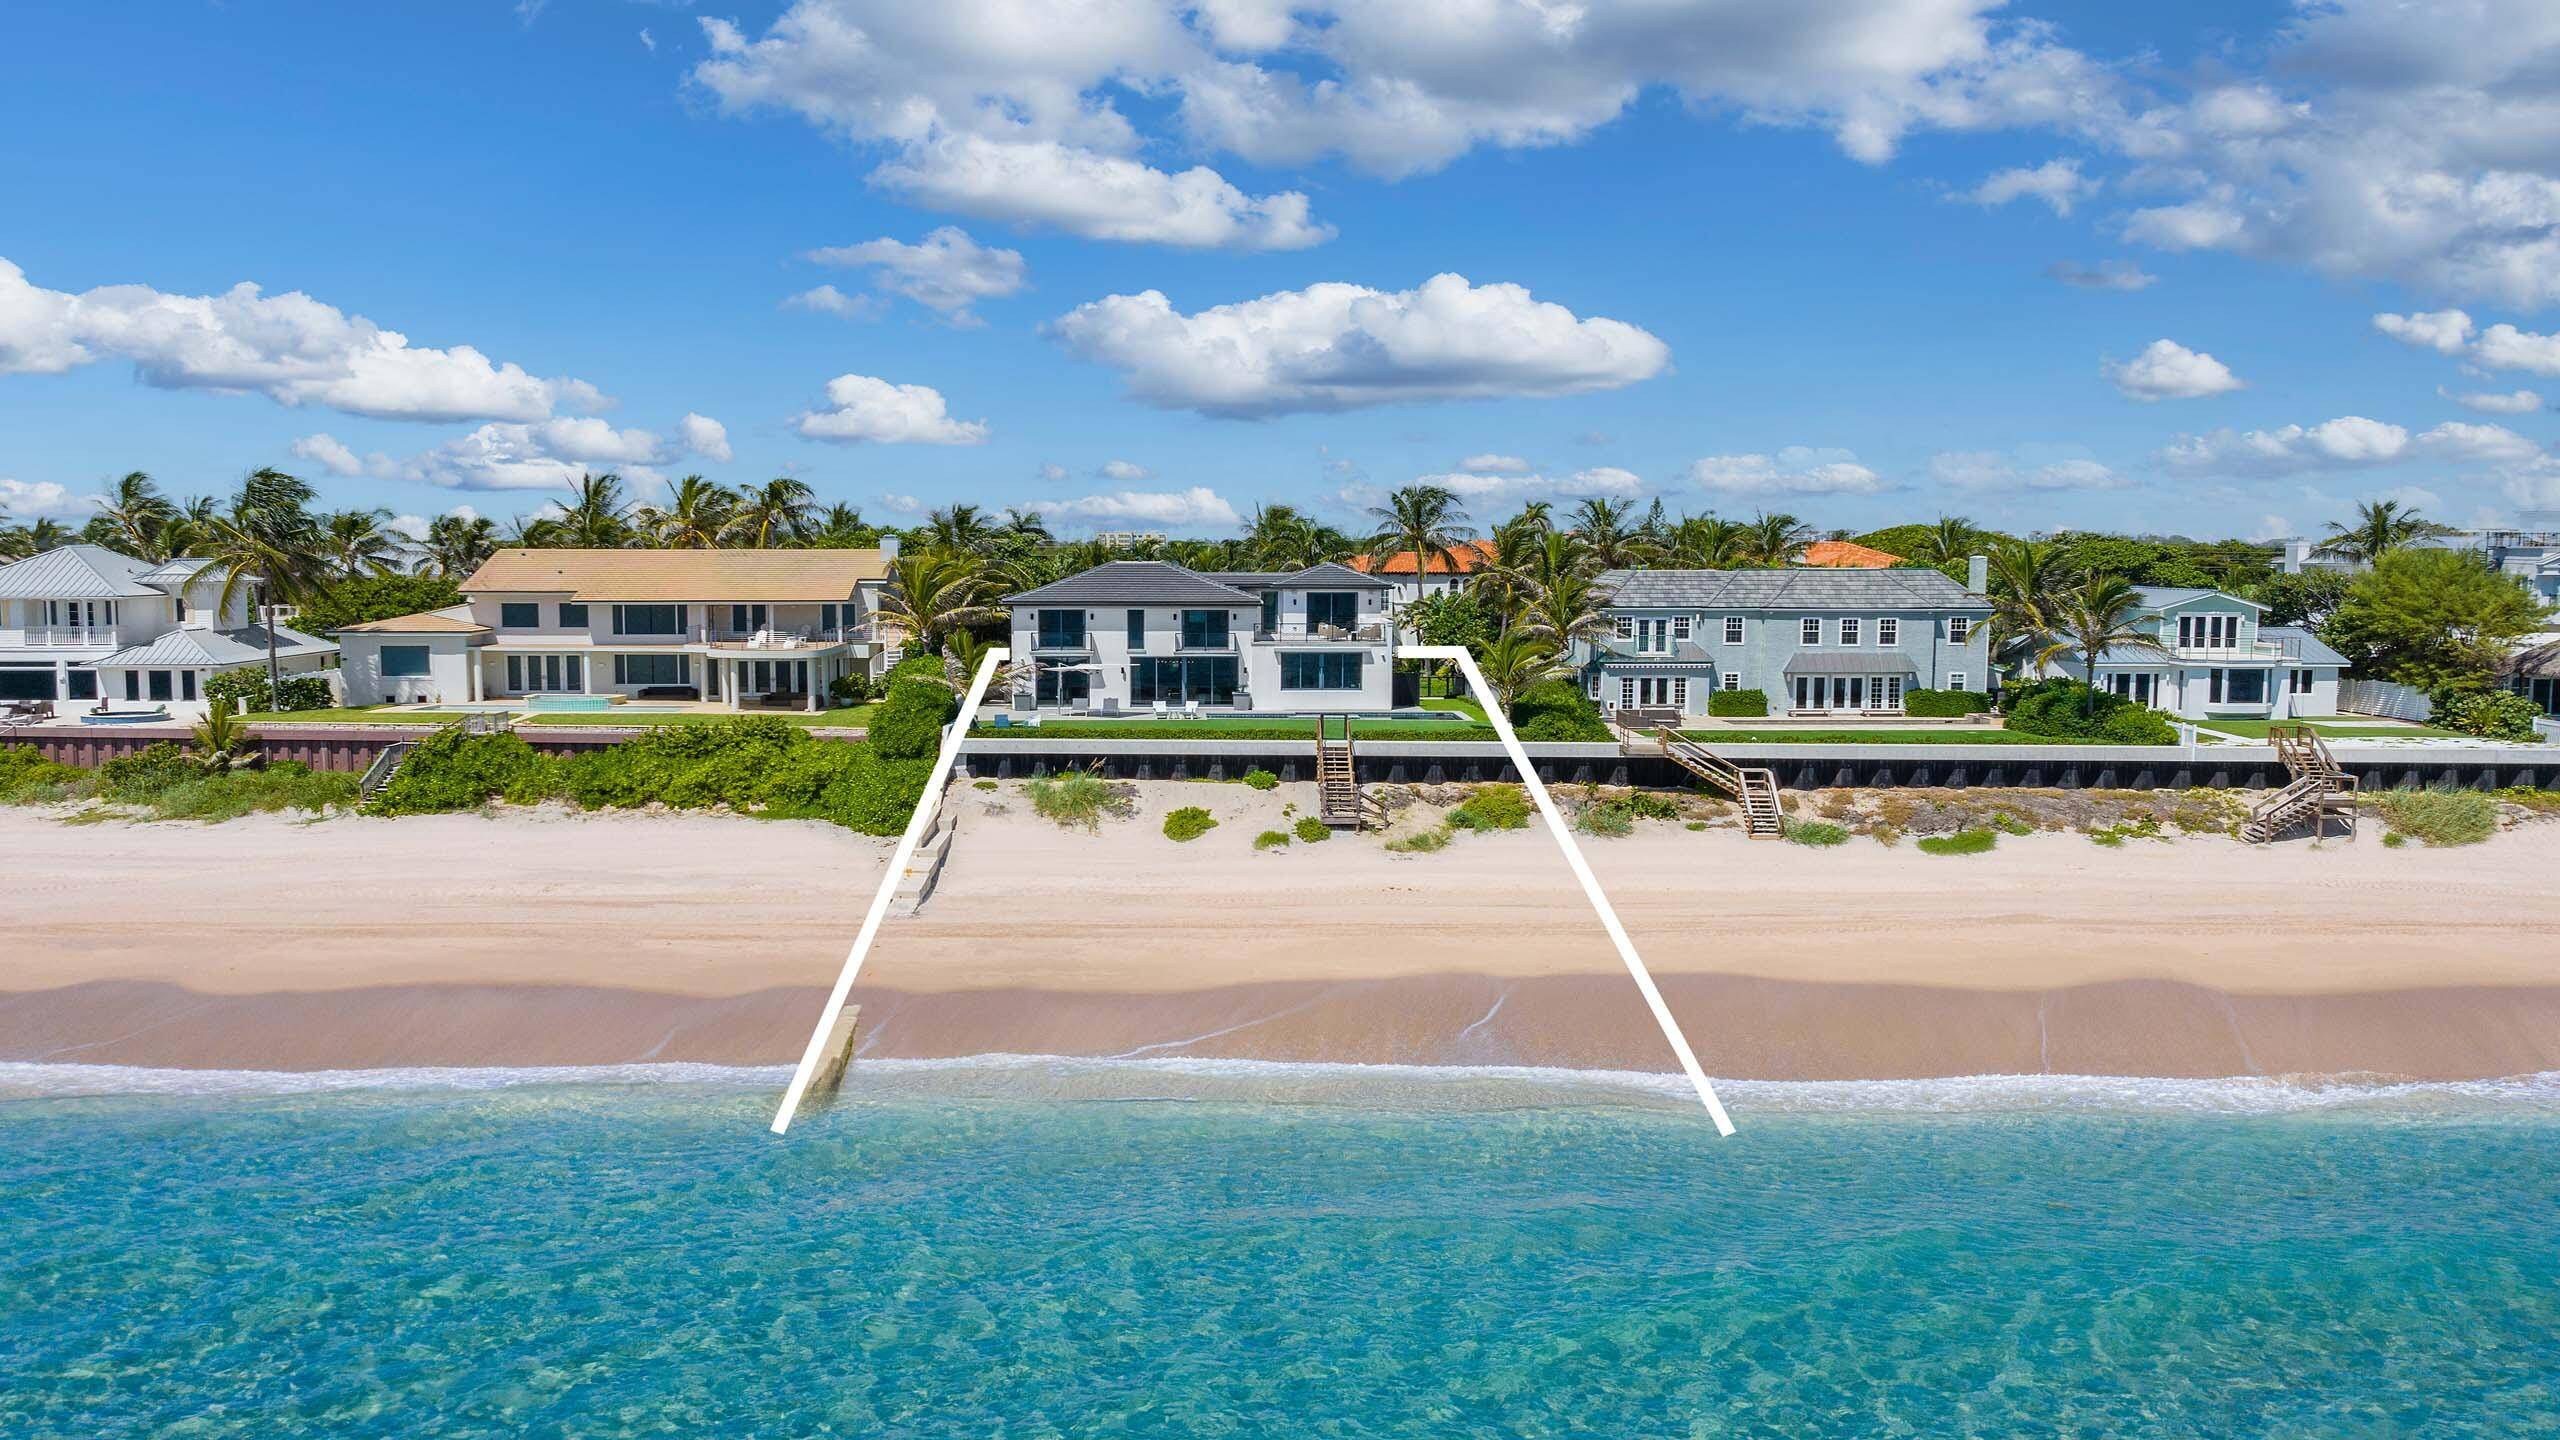 Offered furnished, this direct Oceanfront estate was completely rebuilt in 2019.